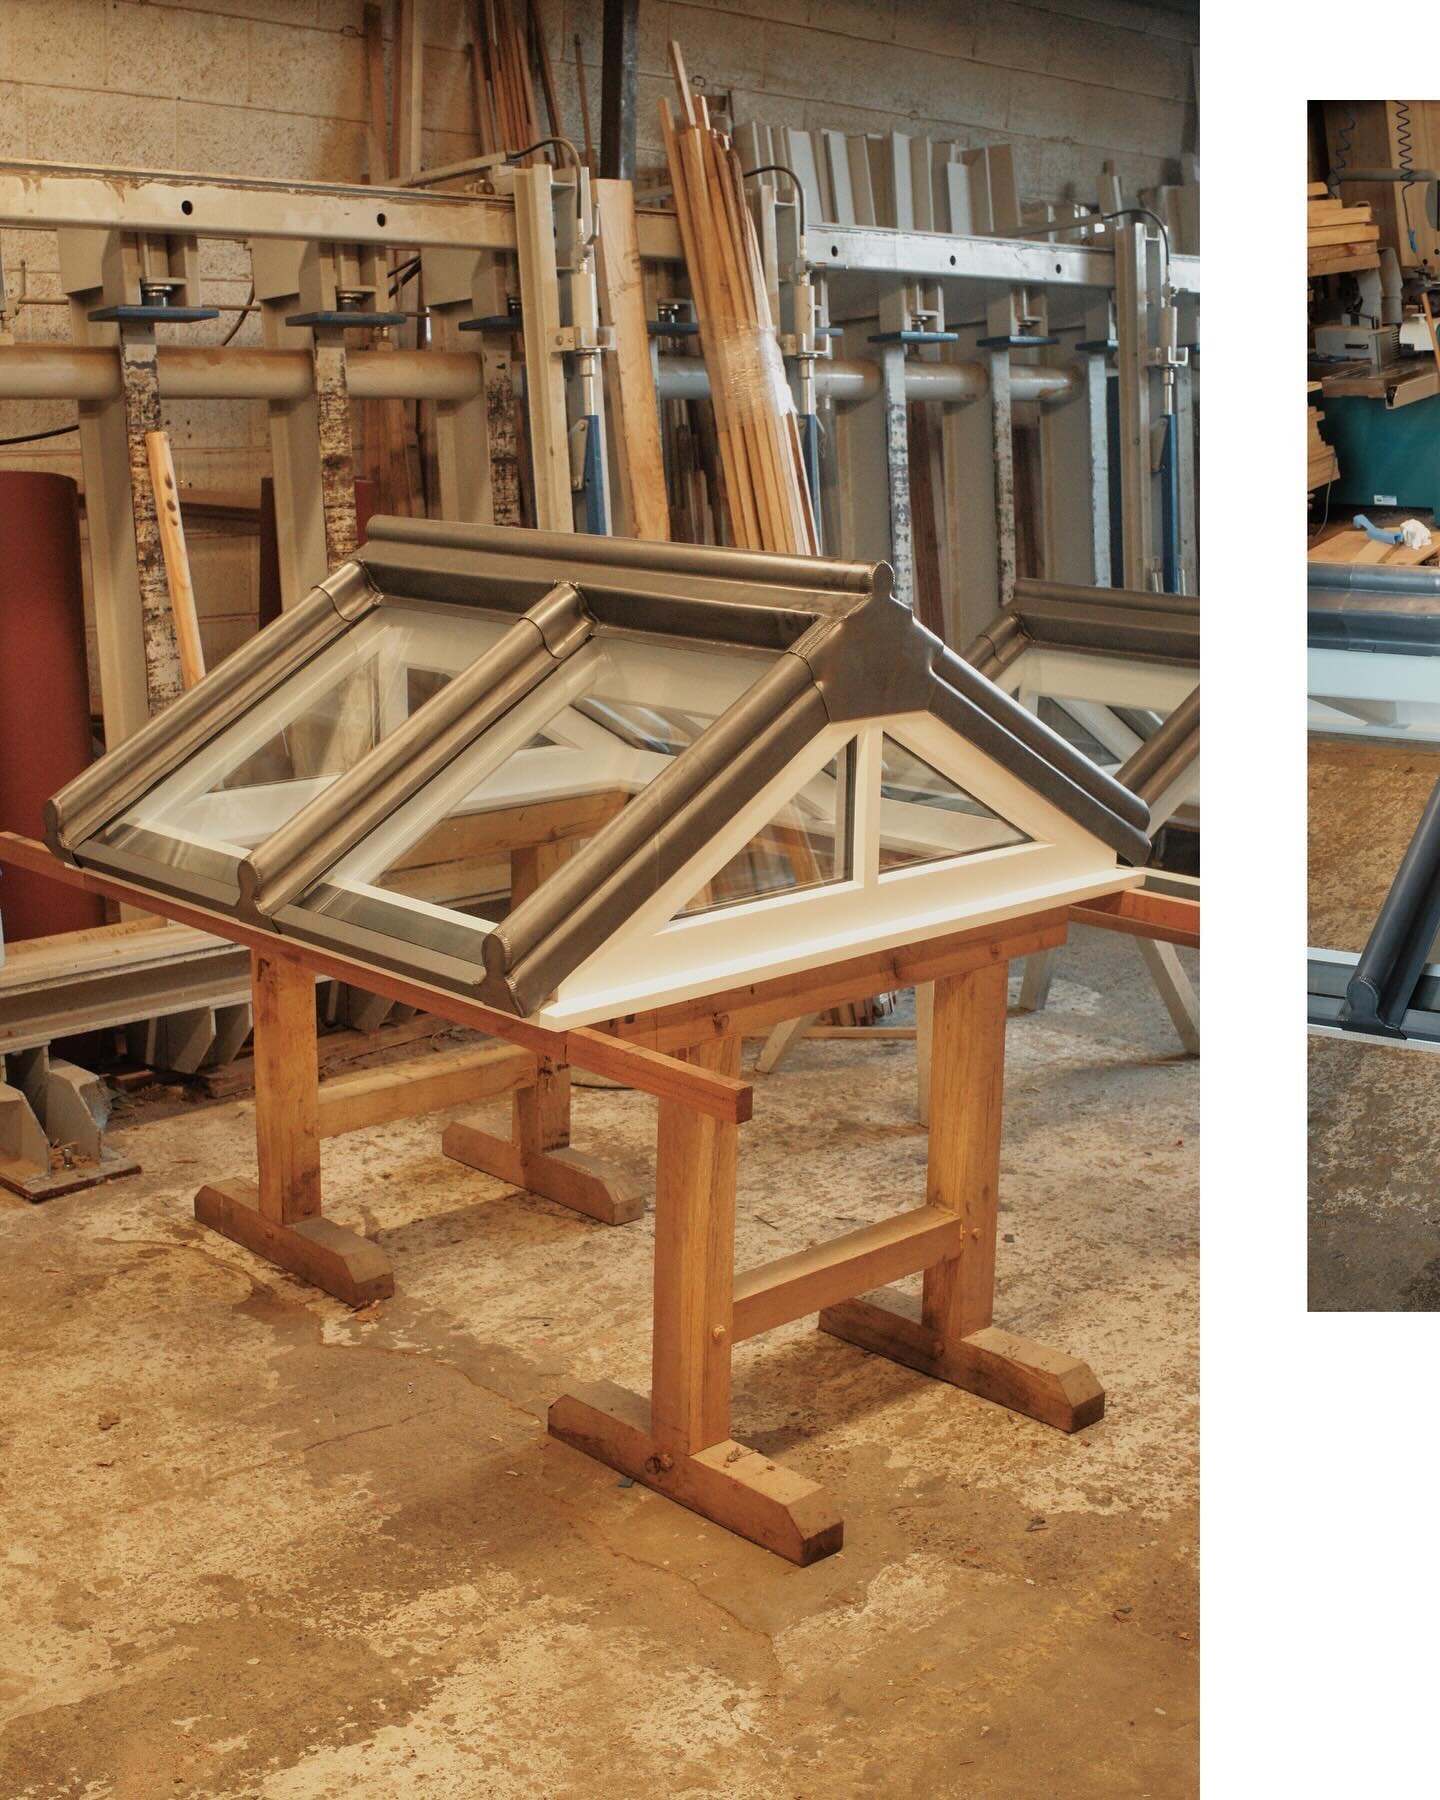 Traditional roof lanterns all made up with lead flashings, for the Tower of London 

#woodworking #bespoke #skylightwindow #custommade #handcrafted #craftsmanship #artisan #woodwork #architecture #TowerOfLondon #historic #heritage #woodenware #interi